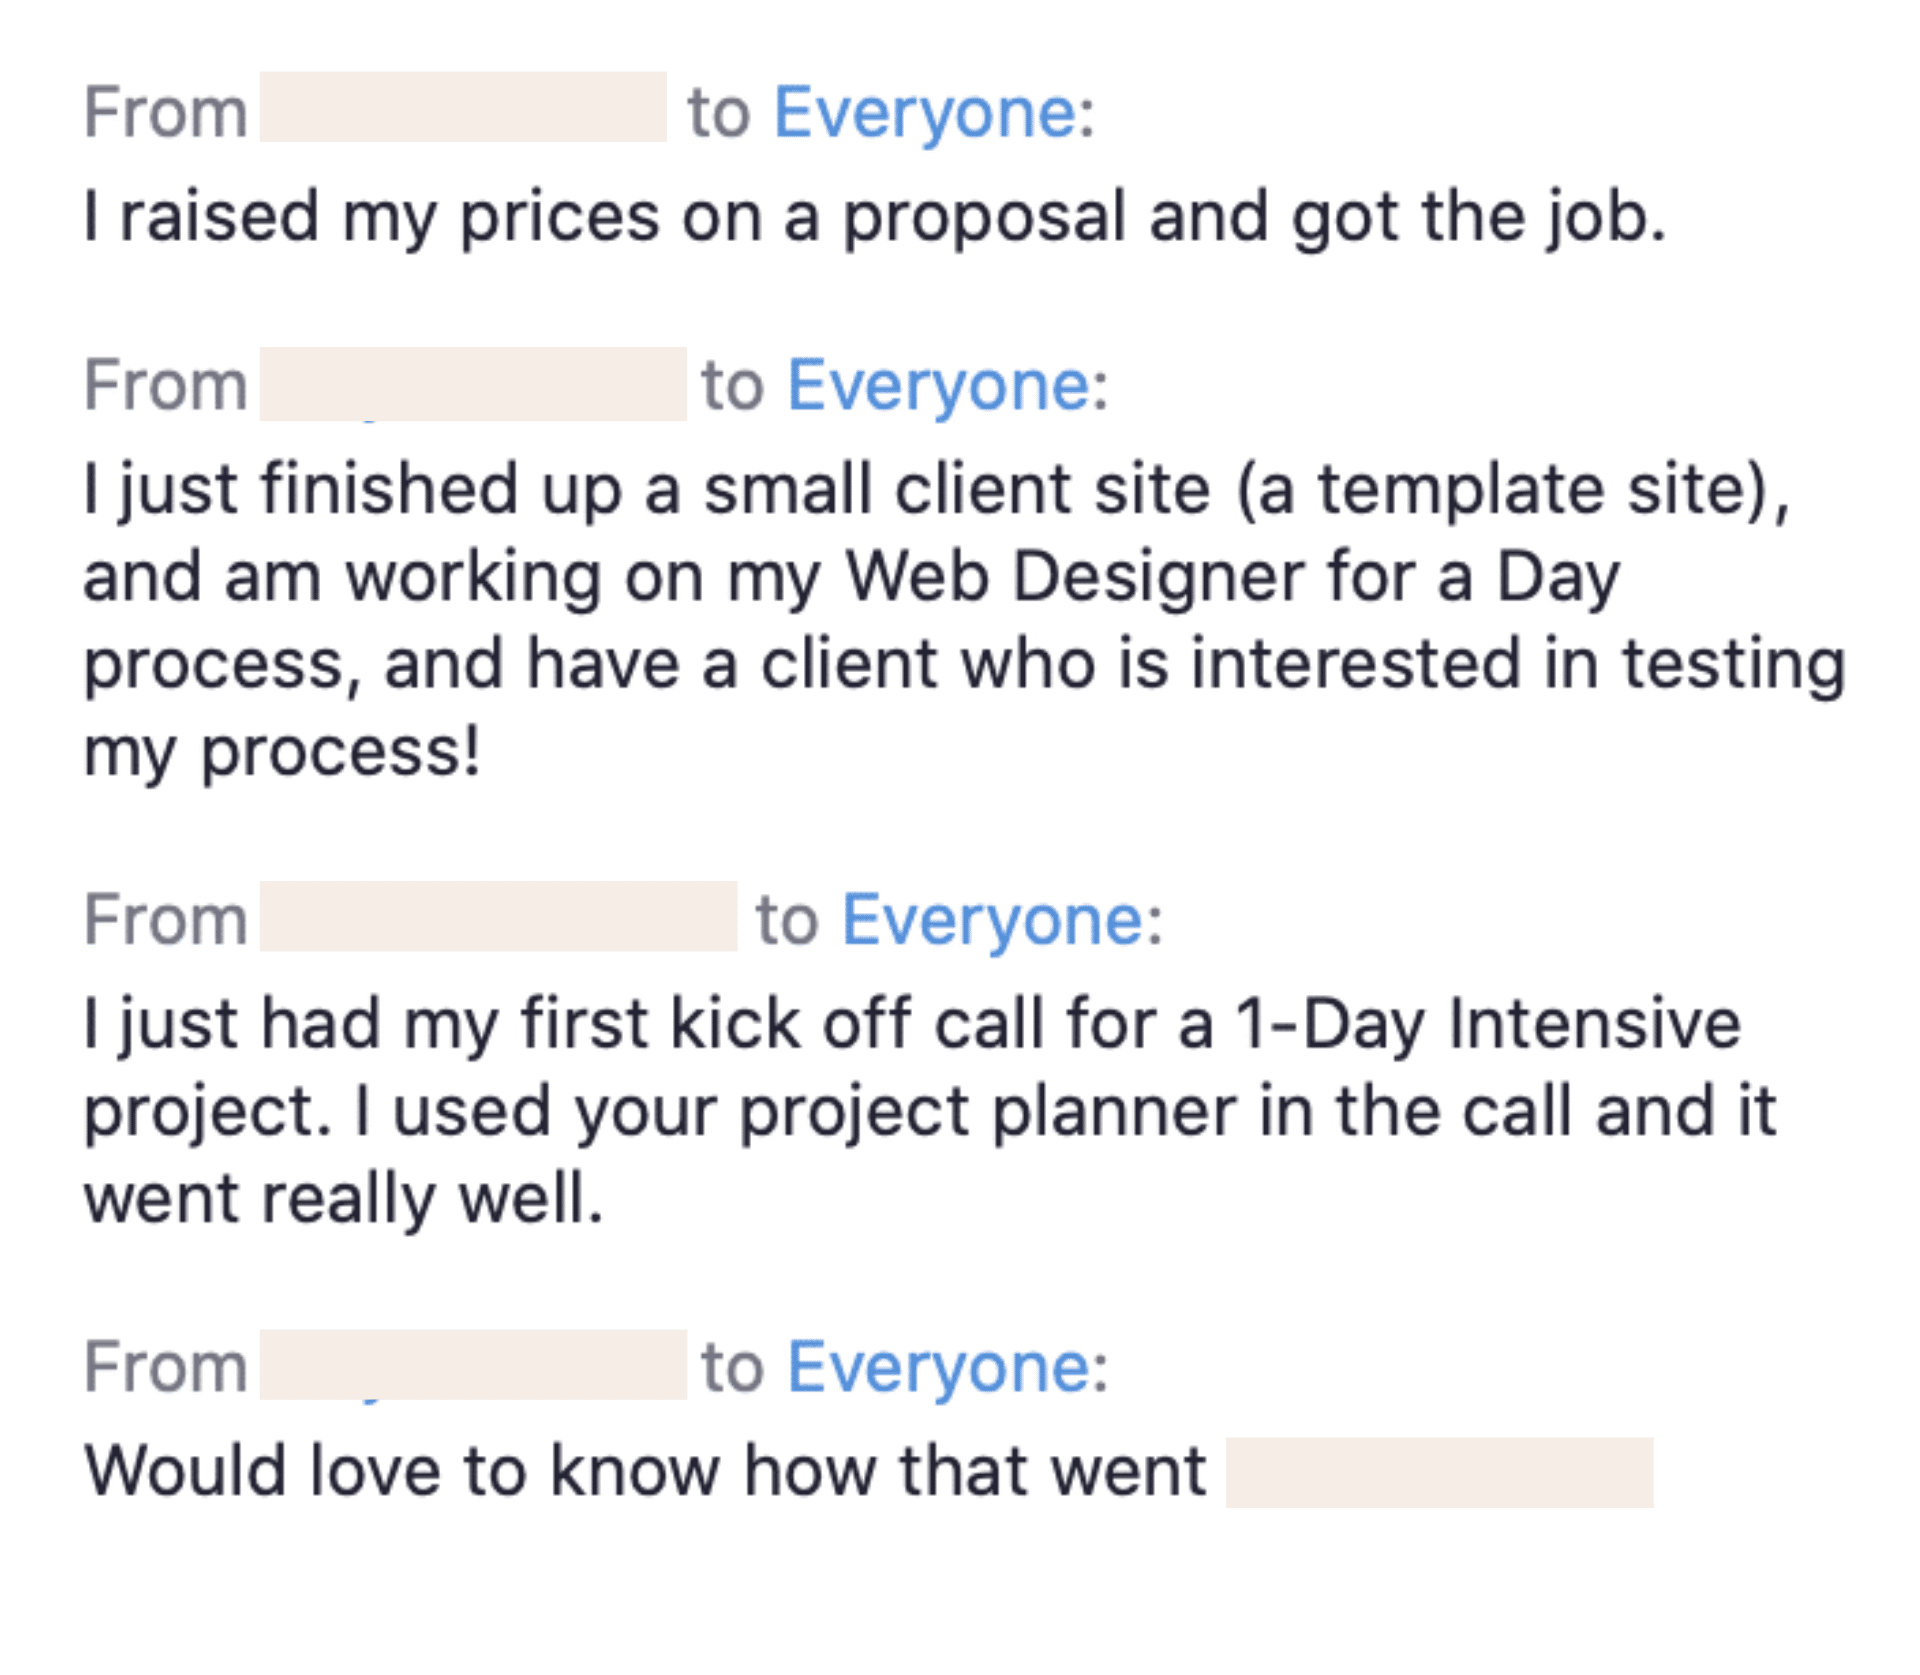 The image is showing the speaker's success in securing a job and completing projects, as well as the speaker's use of a project planner for a successful kick off call. Full Text: From to Everyone: I raised my prices on a proposal and got the job. From to Everyone: I just finished up a small client site (a template site), and working on my Web Designer for a Day process, and have a client who is interested in testing my process! From to Everyone: I just had my first kick off call for a 1-Day Intensive project. I used your project planner in the call and it went really well. From to Everyone: Would love to know how that went